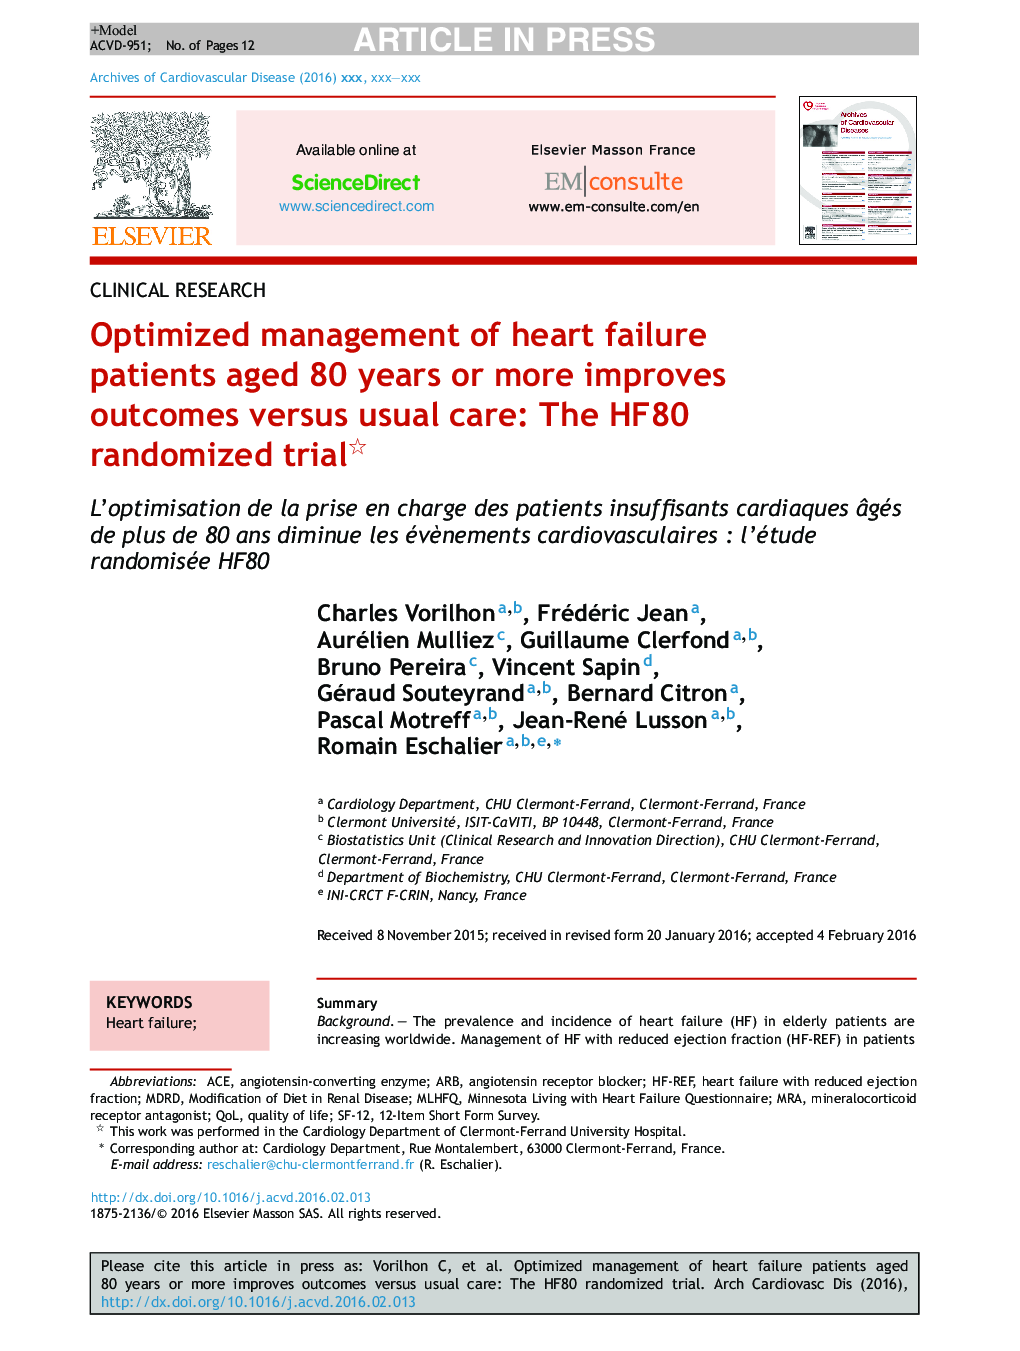 Optimized management of heart failure patients aged 80 years or more improves outcomes versus usual care: The HF80 randomized trial